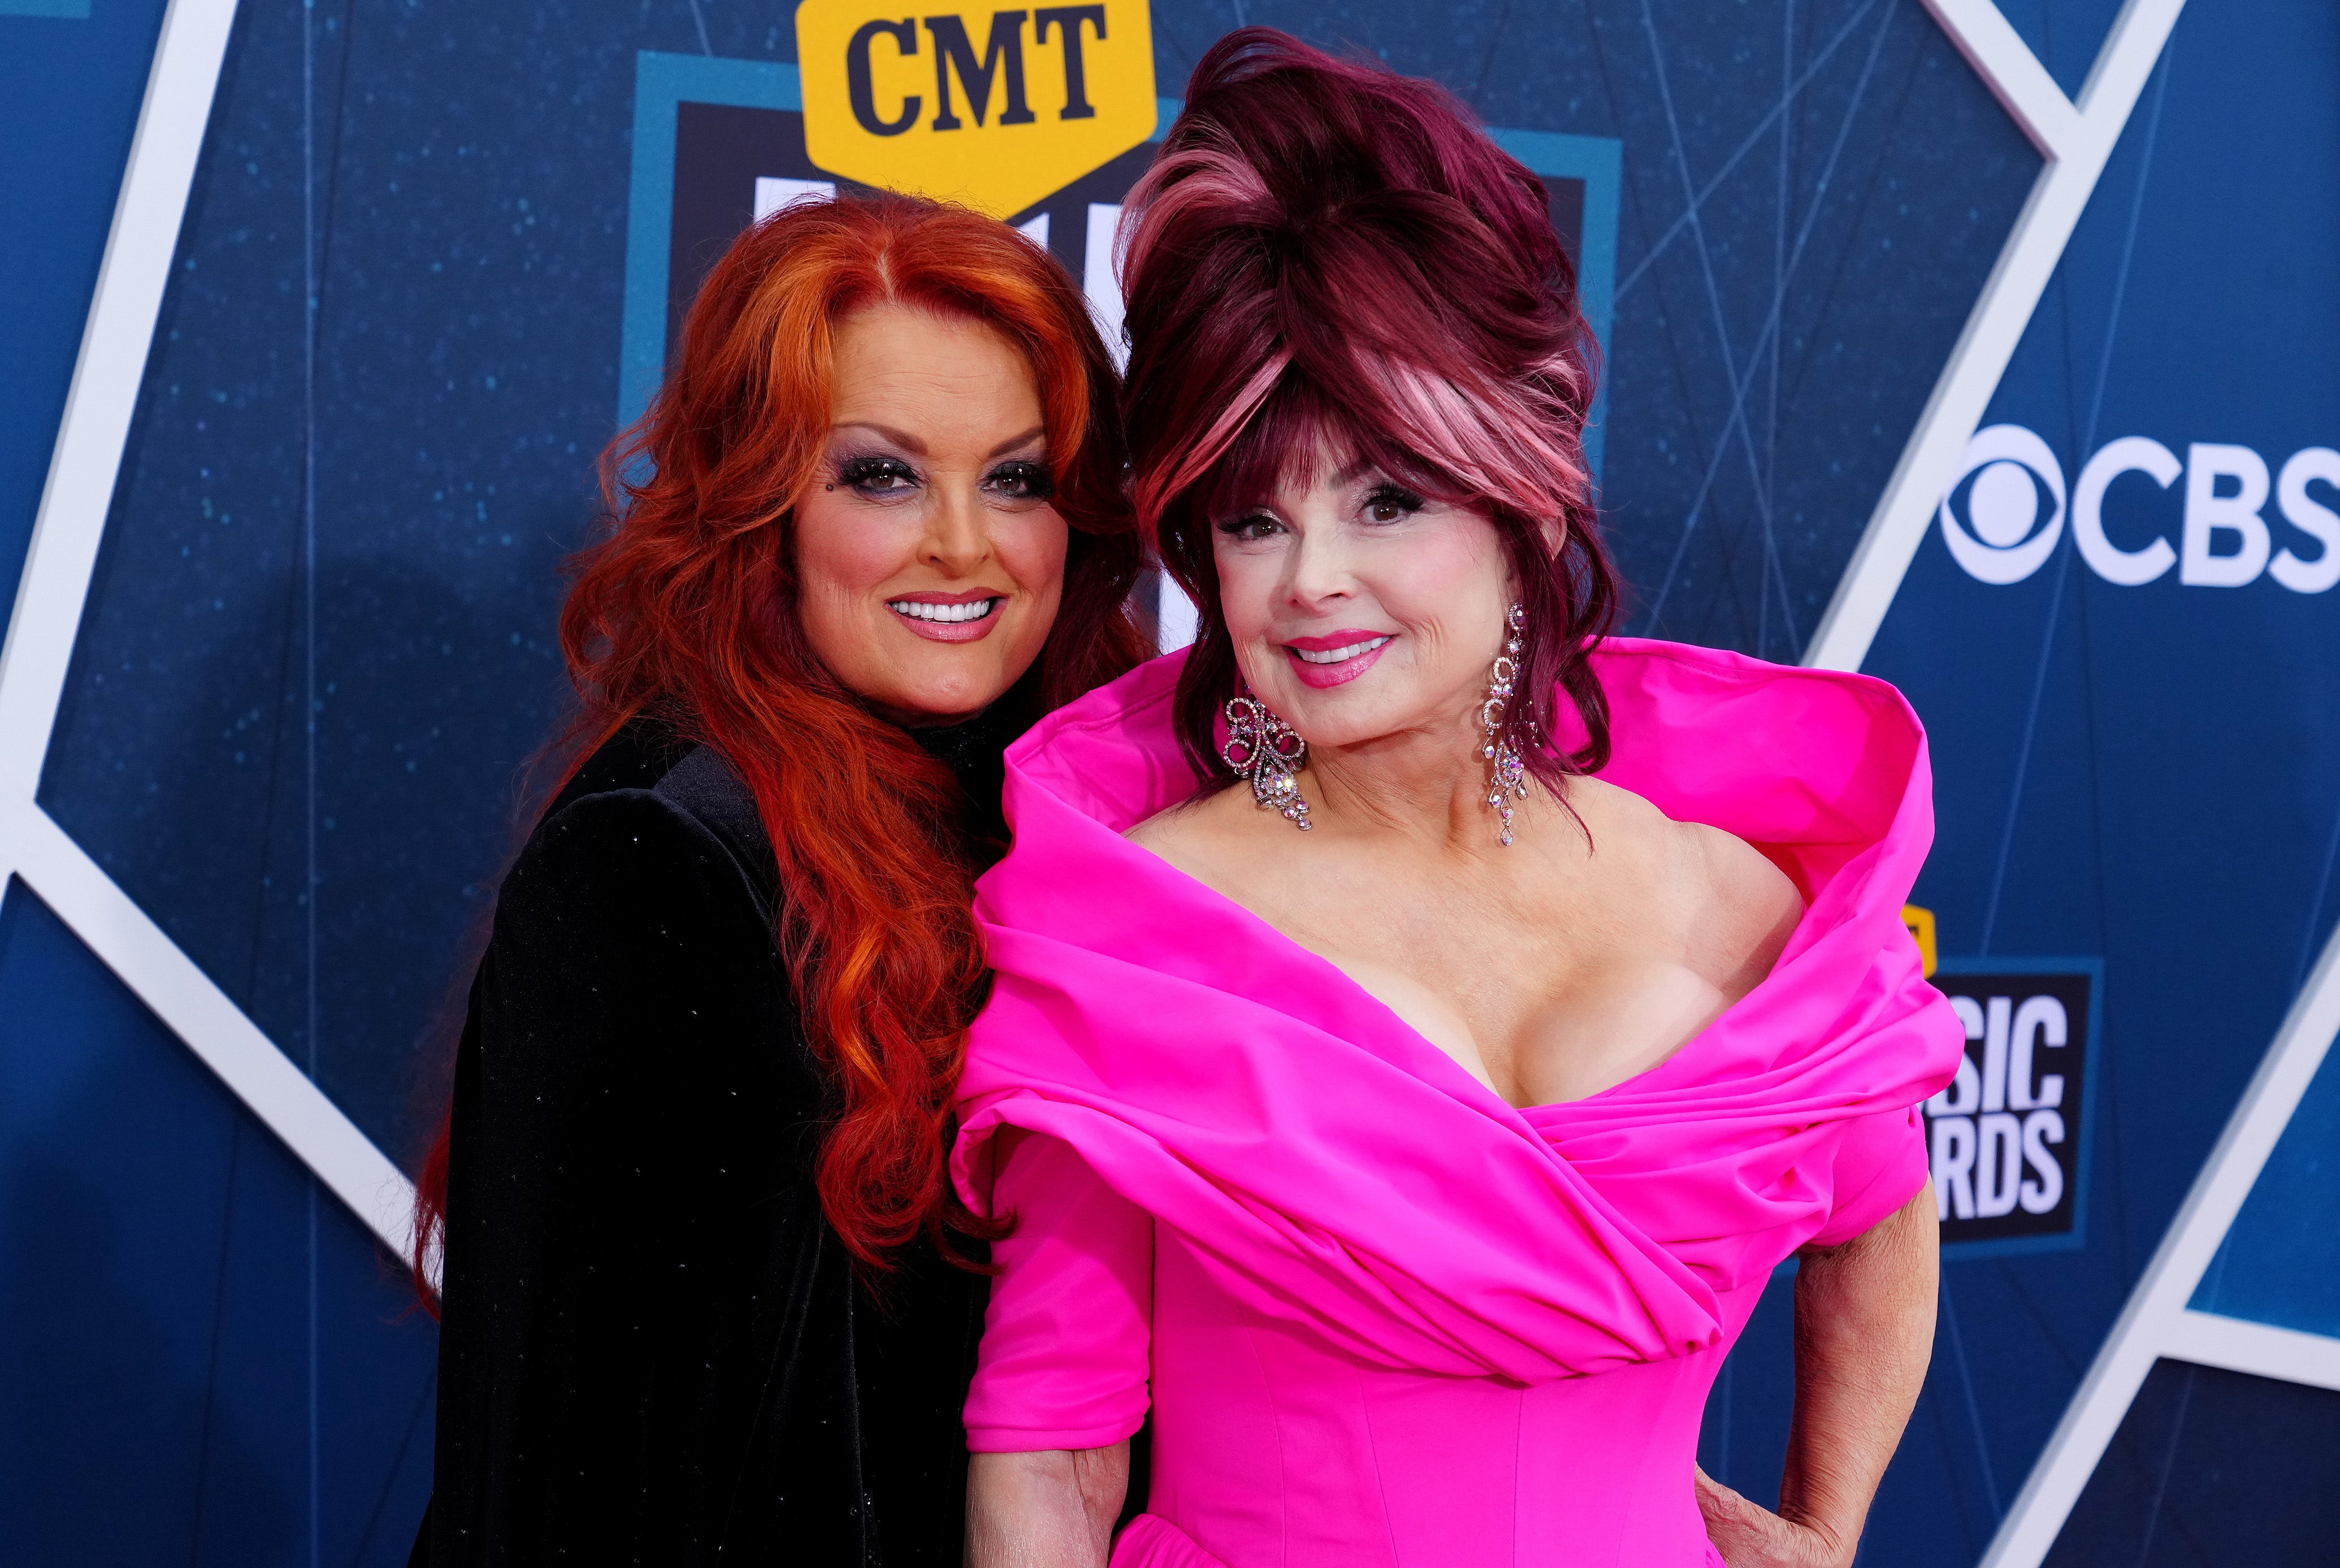 Wynonna Judd and Naomi Judd made up the musical group The Judds. (Jeff Kravitz/Getty Images for CMT)